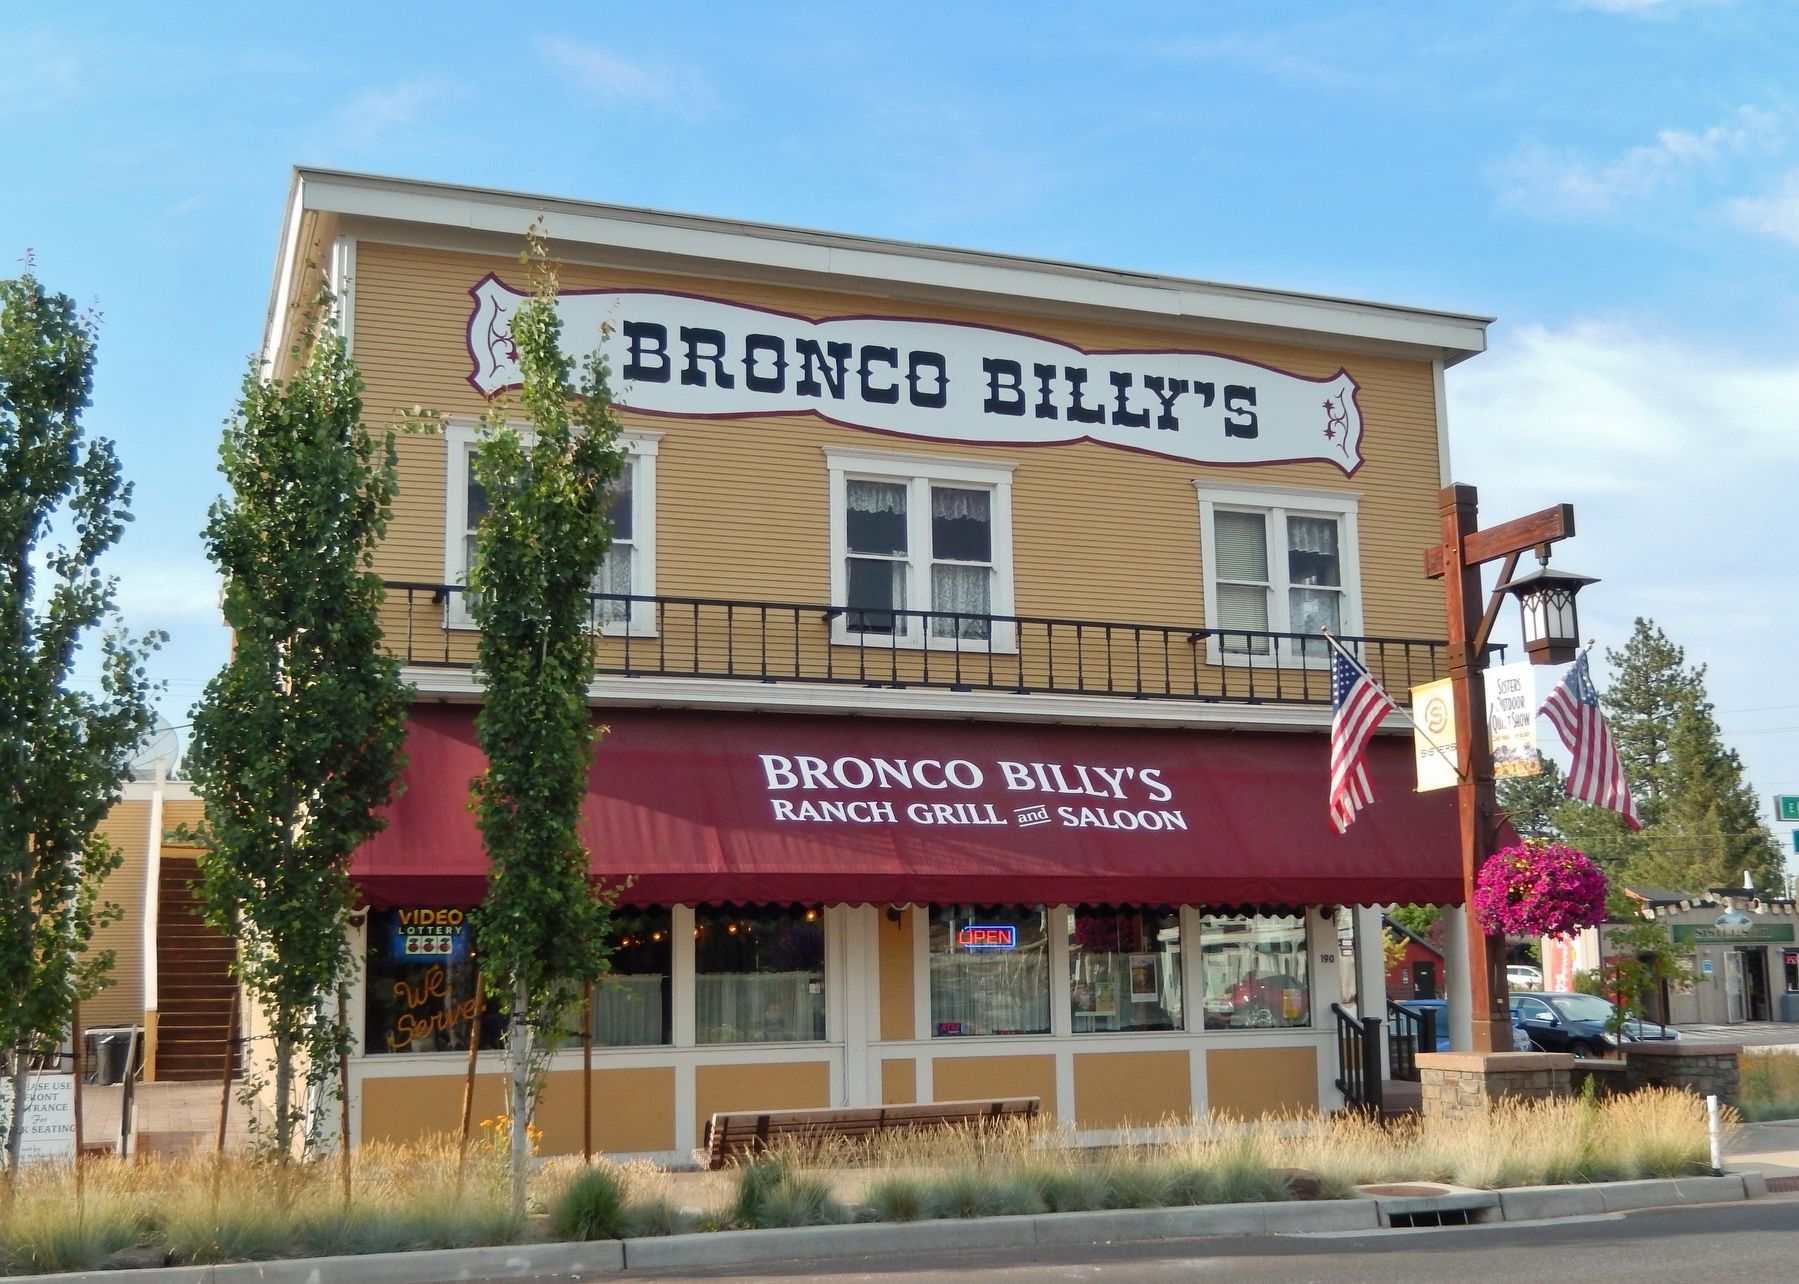 Bronco Billy's Ranch Grill (formerly Hotel Sisters) image. Click for full size.